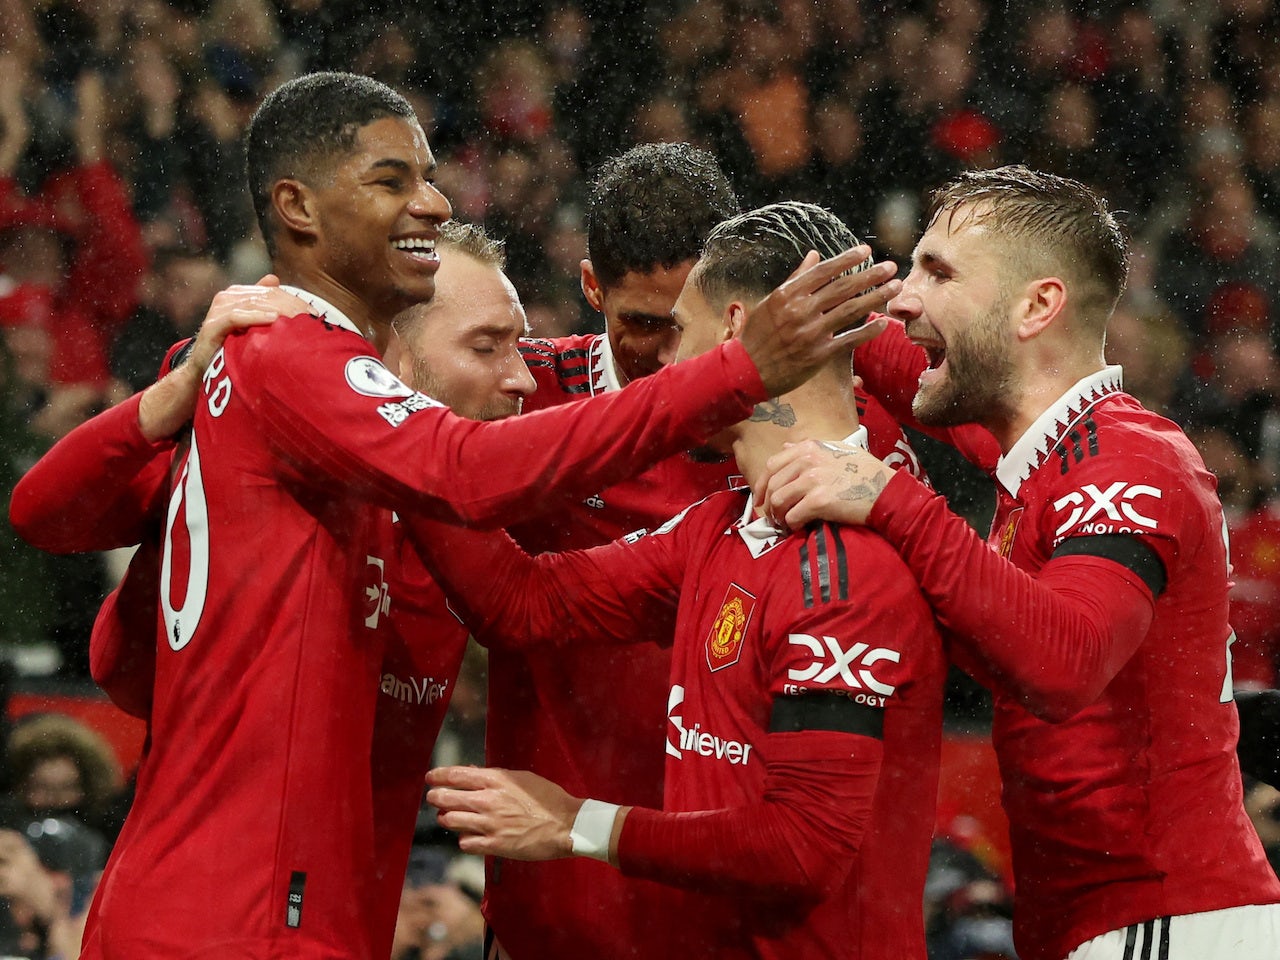 Preview: Wolverhampton Wanderers vs. Manchester United - prediction, team news, lineups